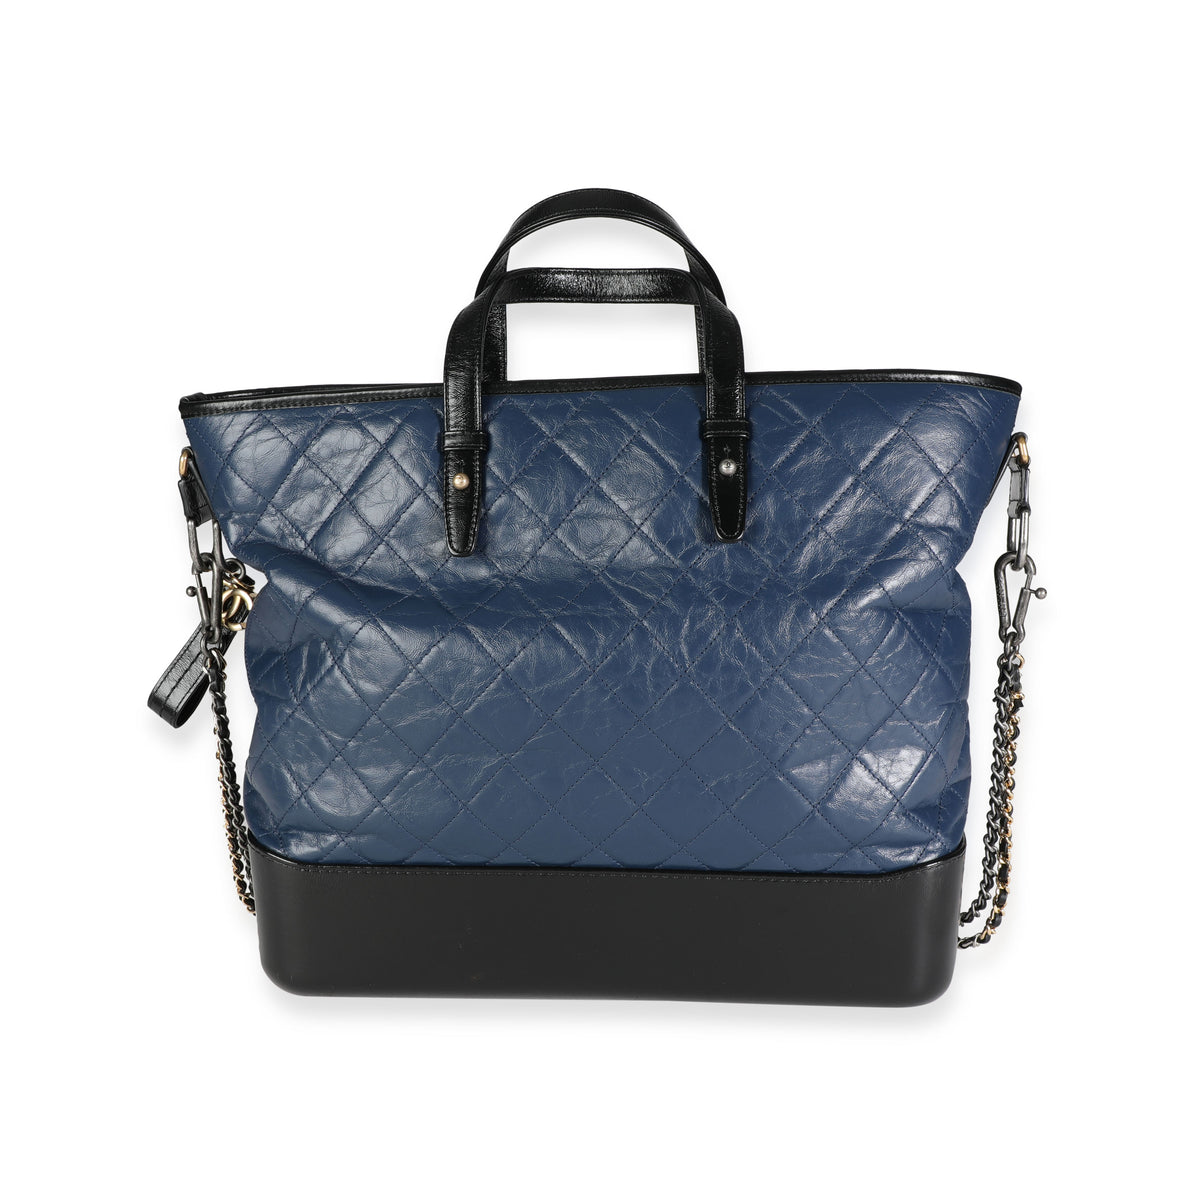 Black & Blue Quilted Calfskin Large Gabrielle Shopping Tote